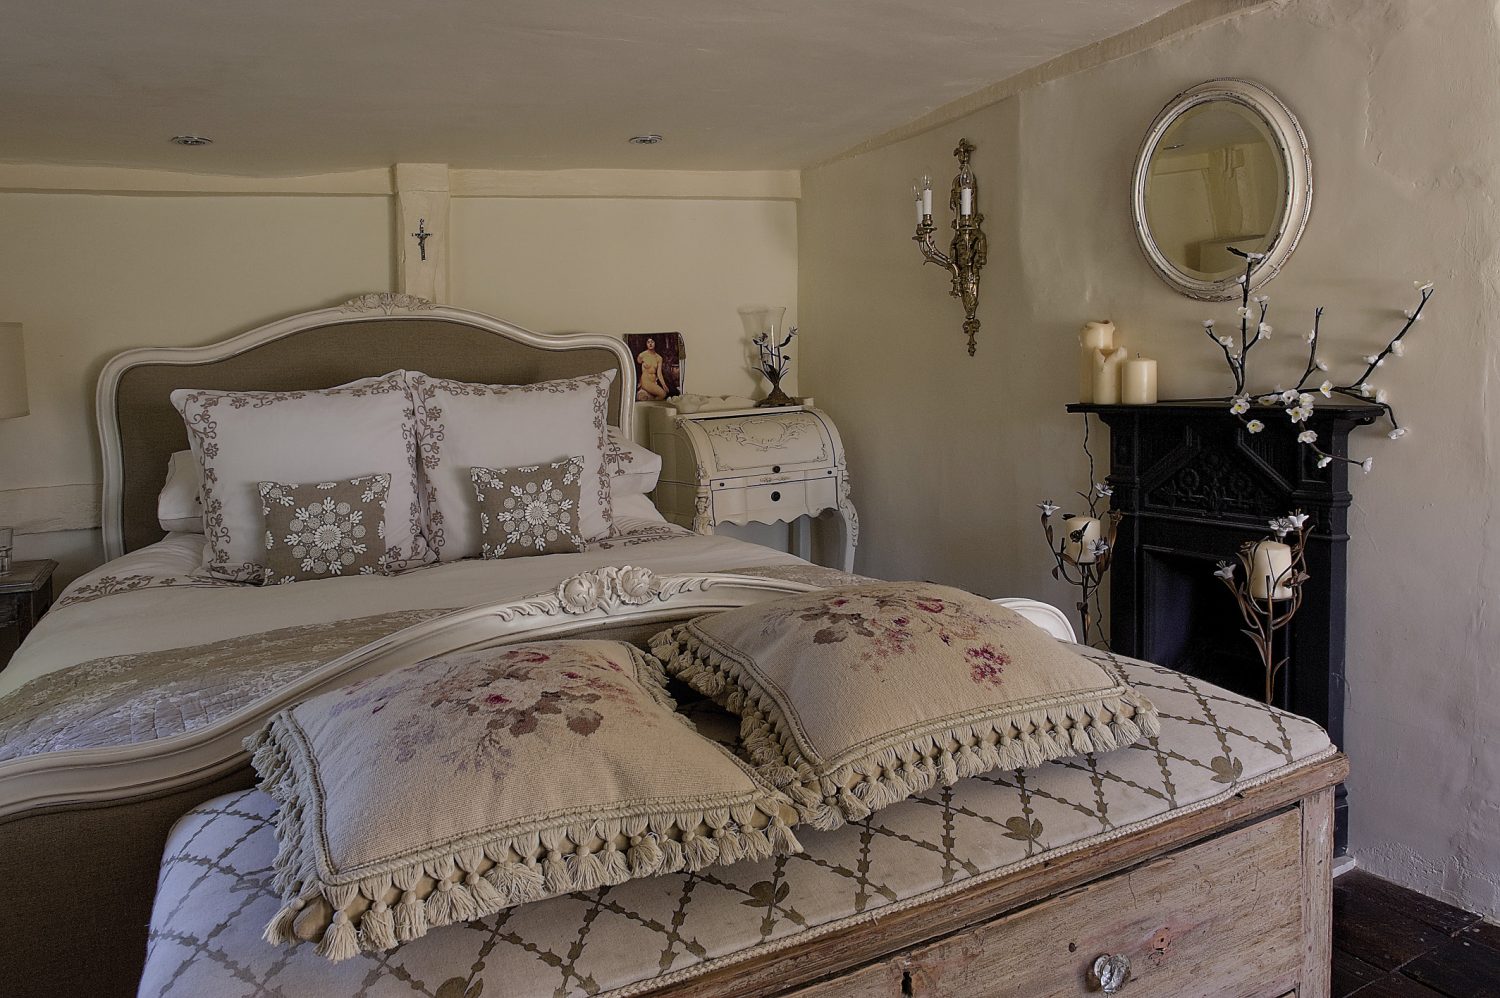 The main bedroom is both simply furnished and extravagantly embellished. The furniture is painted or limed and texture and pattern is added in the form of piqué bedcovers, silk throws and embroidered and appliquéd cushions